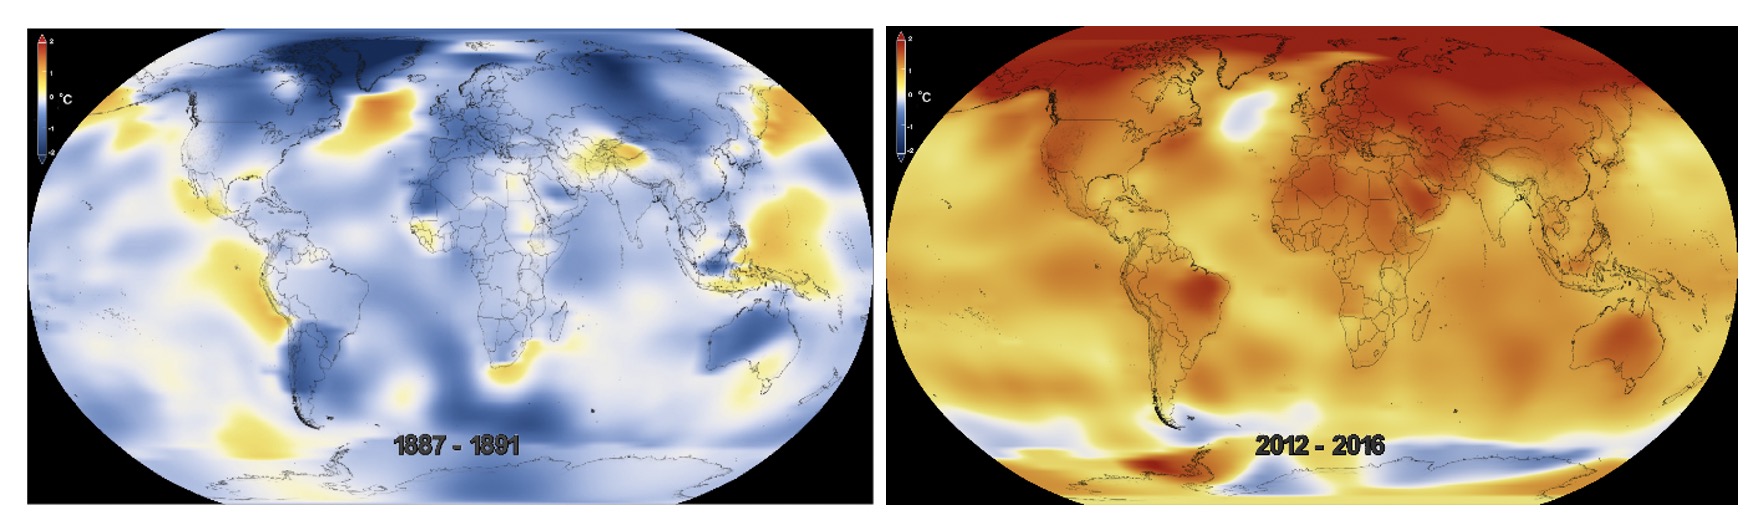 NASA Five-Year Global Temperature Anomalies 1887-1891 (Left) and 2012-2016 (Right).